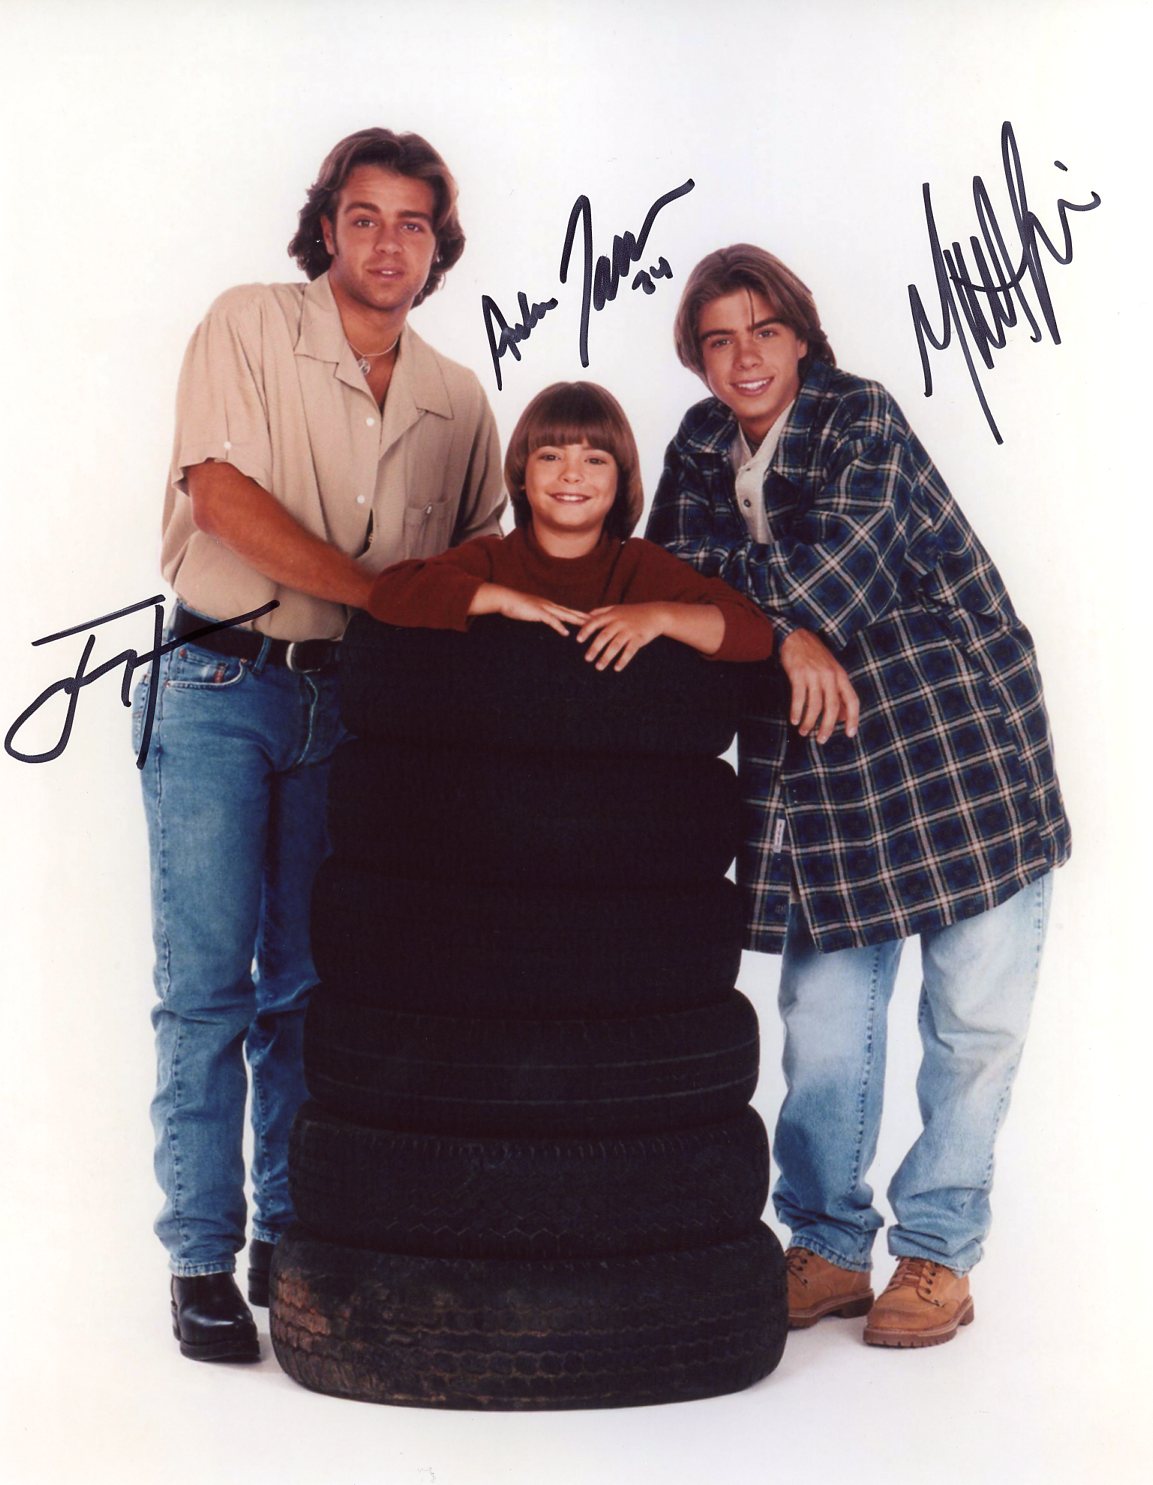 Brotherly Love 8x10 Photo Cast x3 Signed Lawrence Brothers JSA Certified Autograph